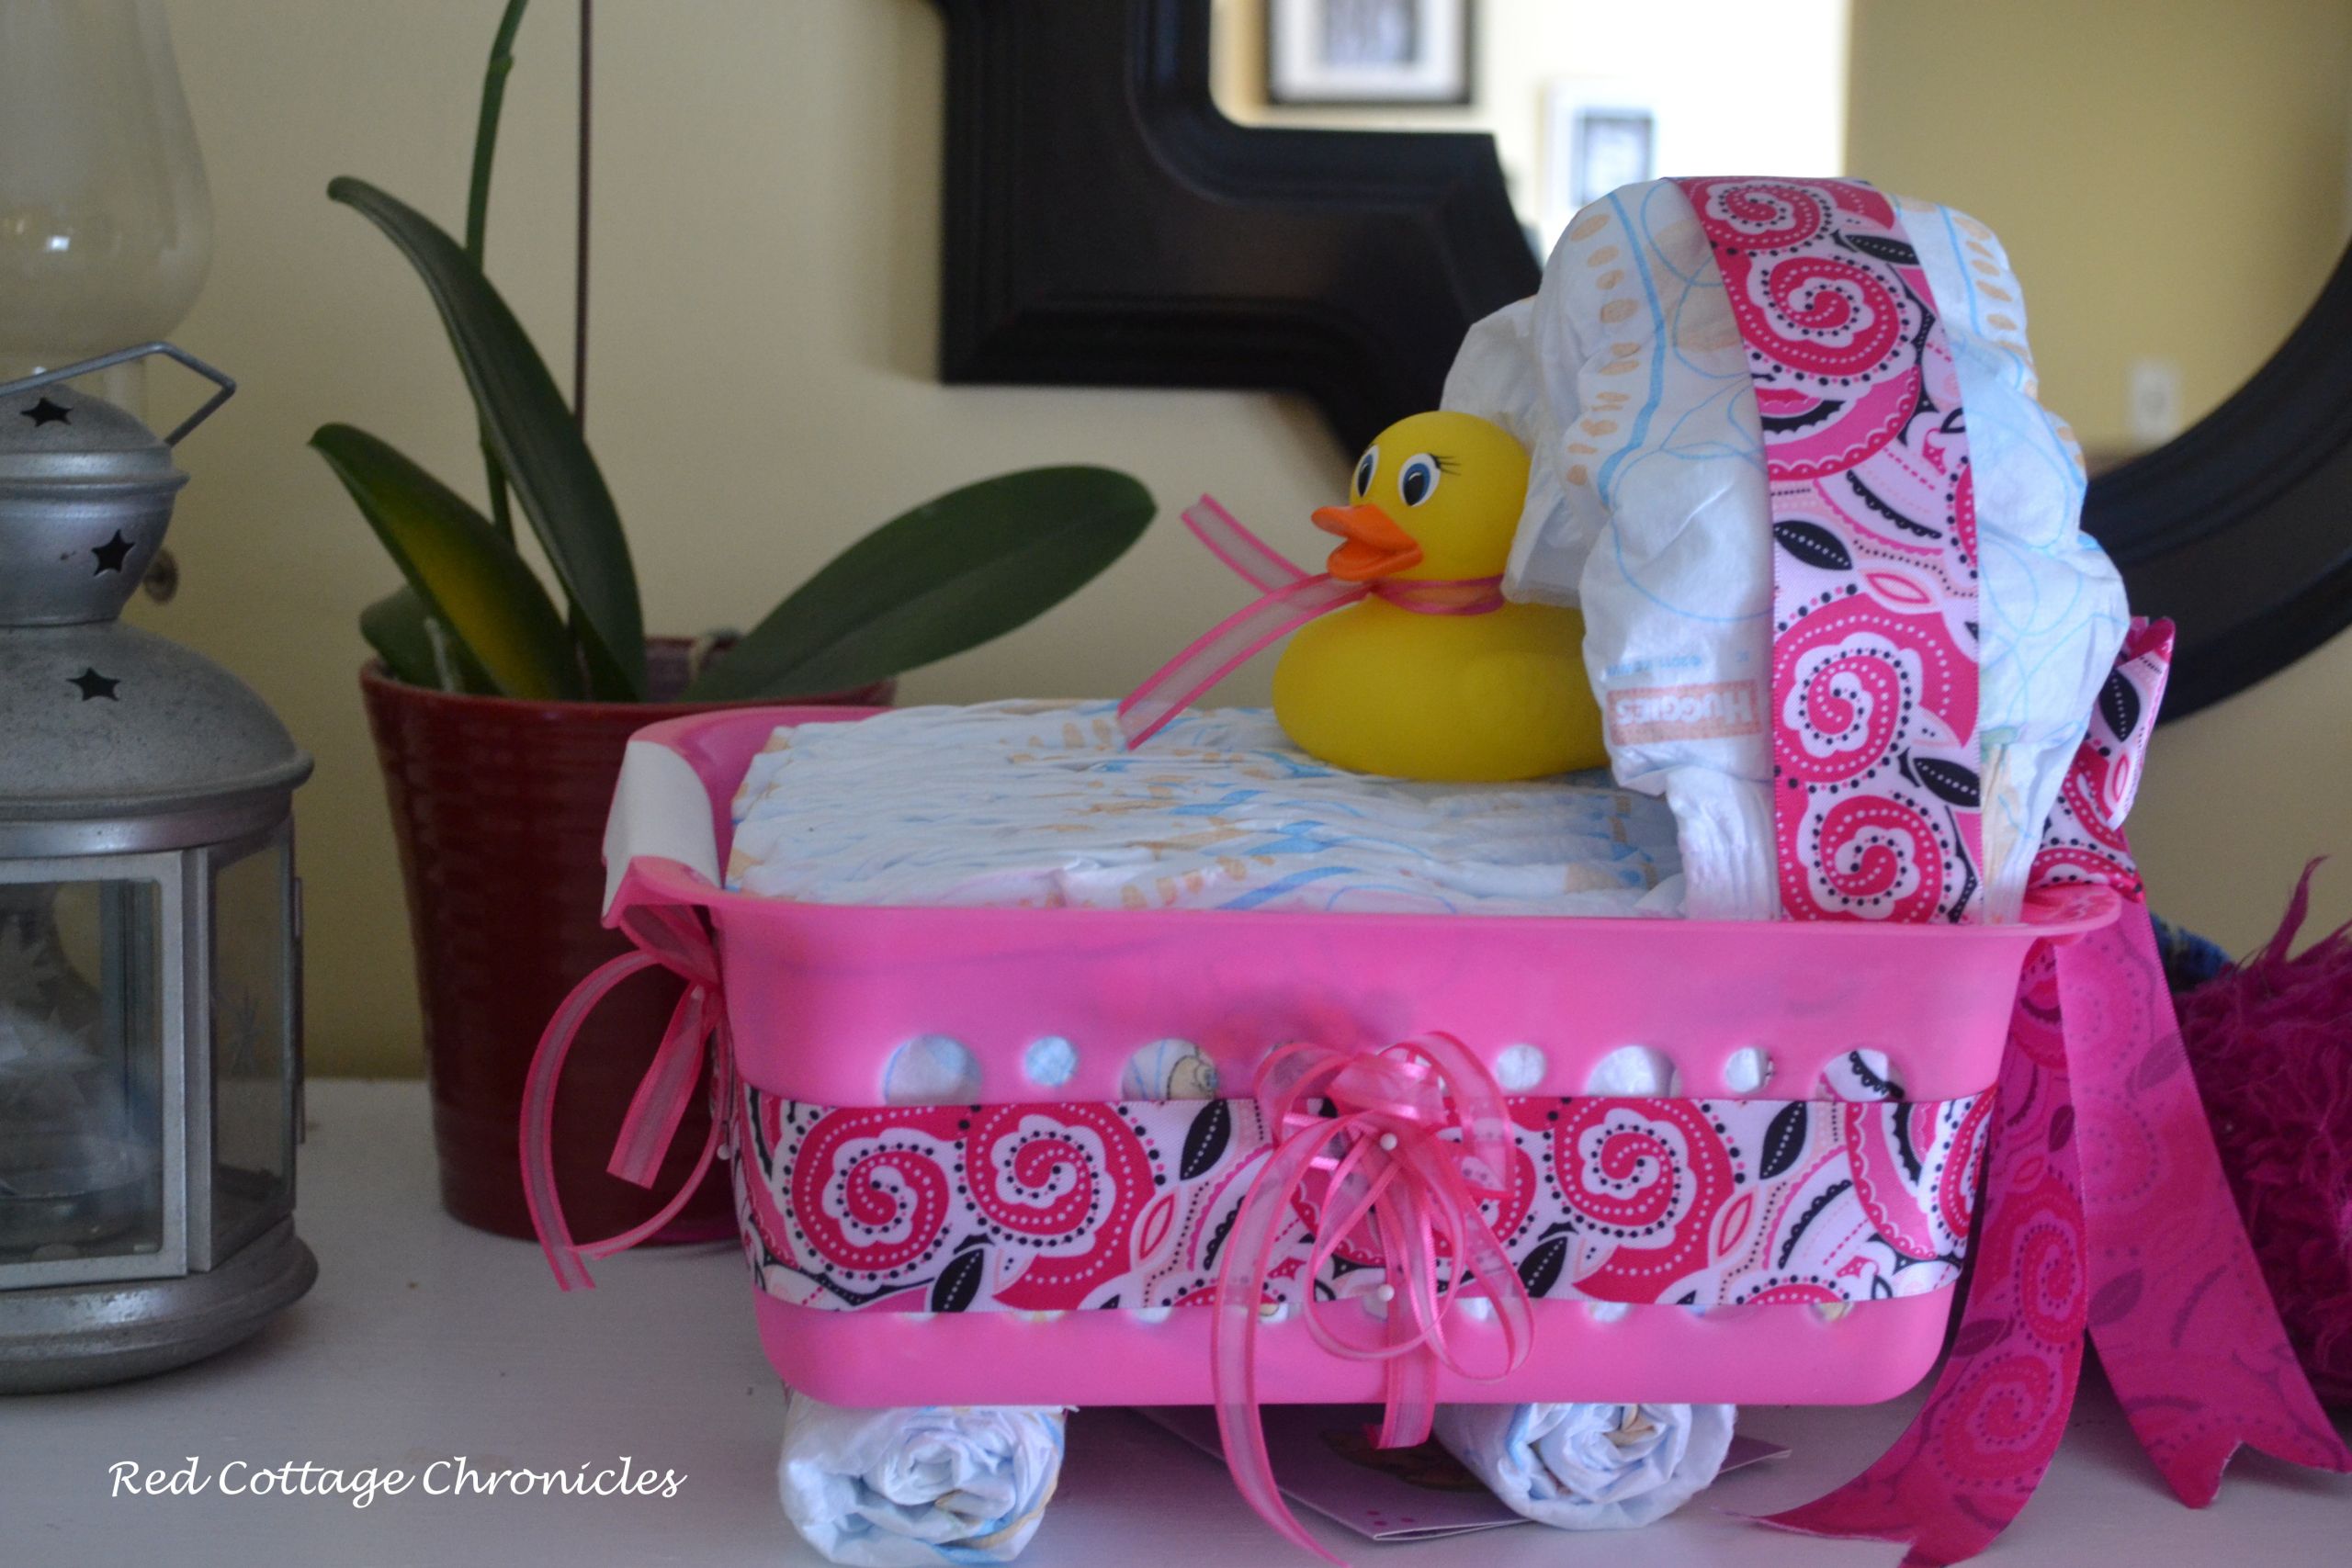 Gift Ideas For A Baby Girl
 This Baby Shower Gift Idea is a practical t any new mom